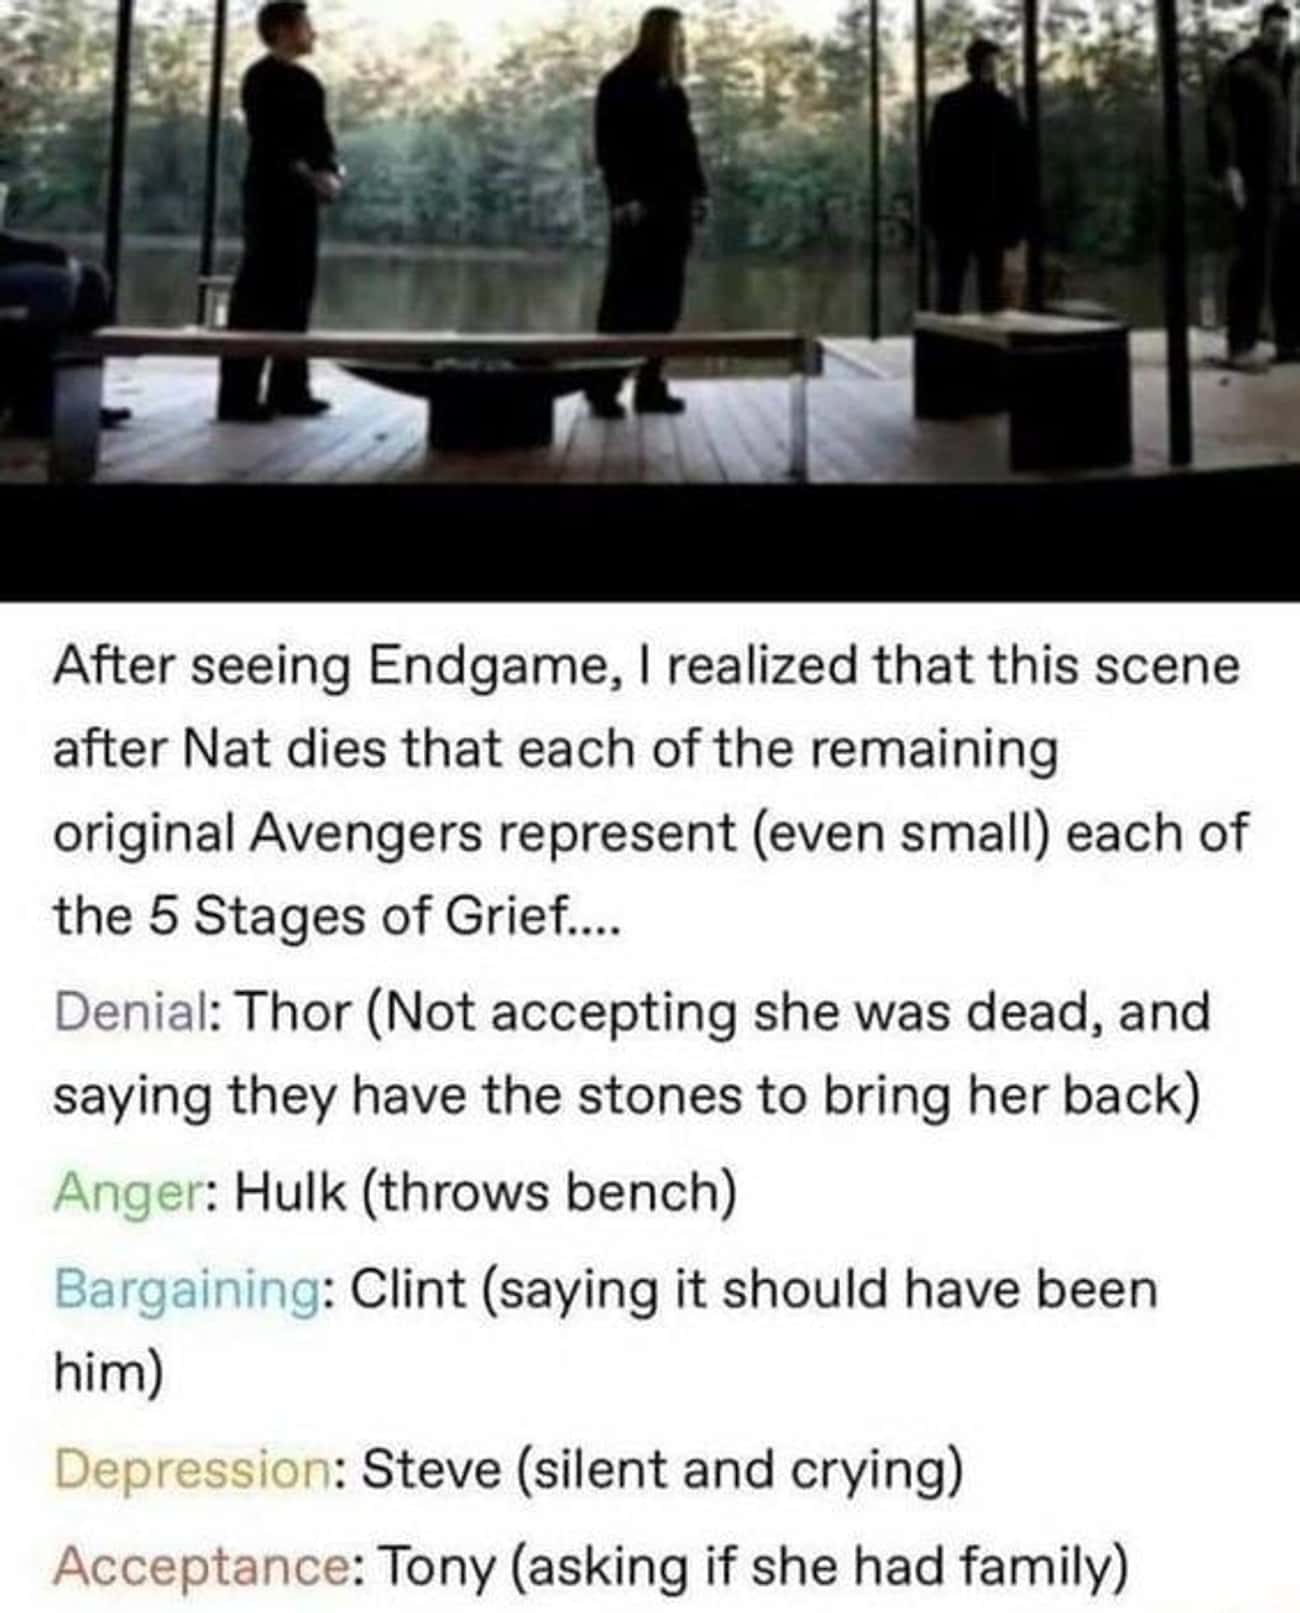 The Avengers Represented The Stages Of Grief After Natasha's Demise